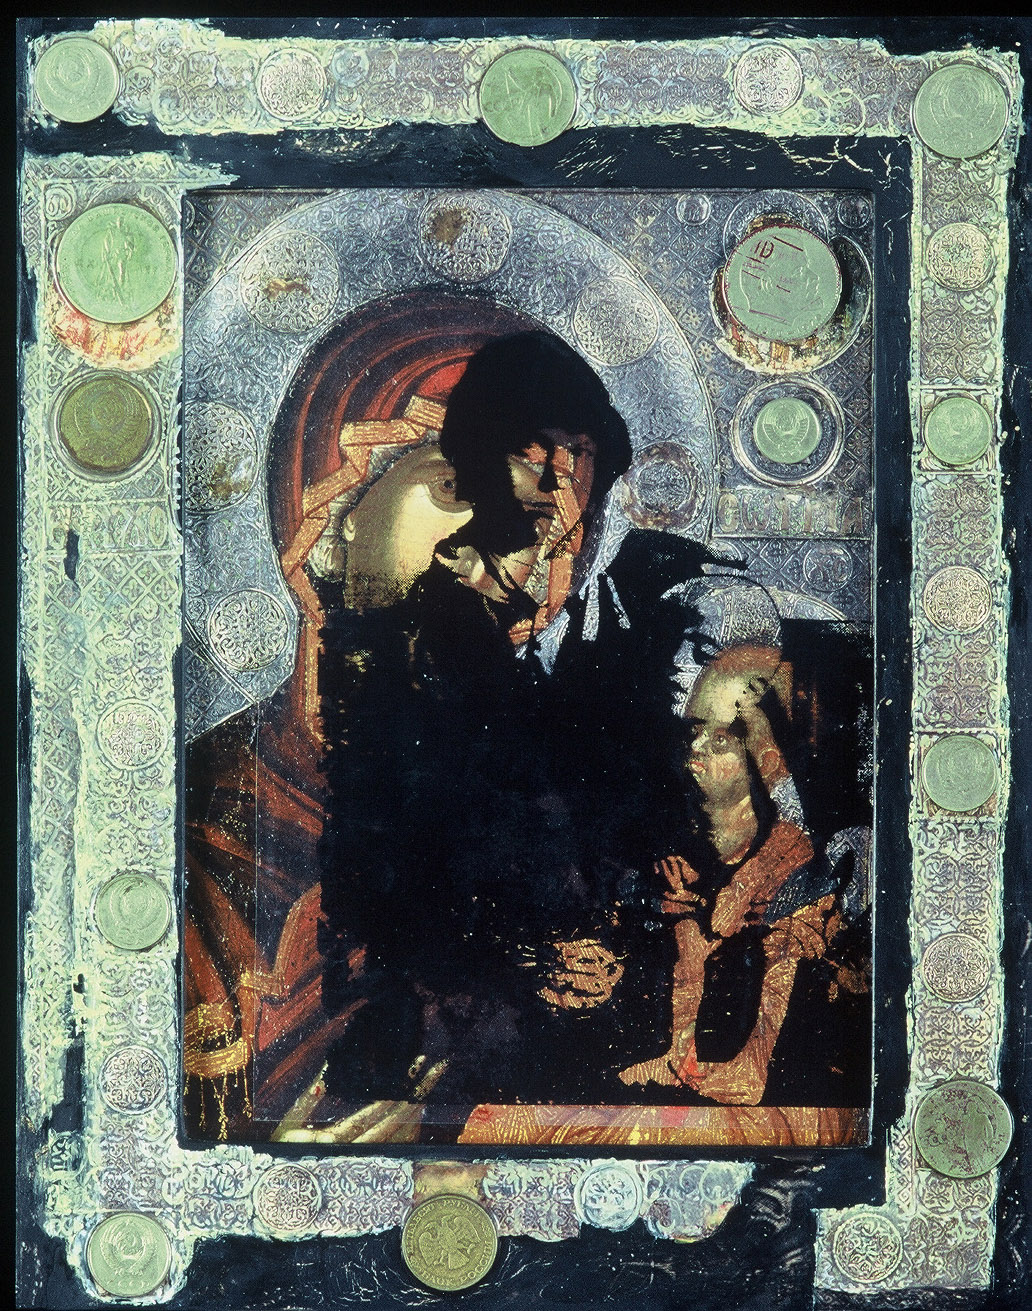 5ac(0) - Another Kind of Icon #2, oil, ruble coins, photocopy, wood, 13x10 in., 1995.jpg